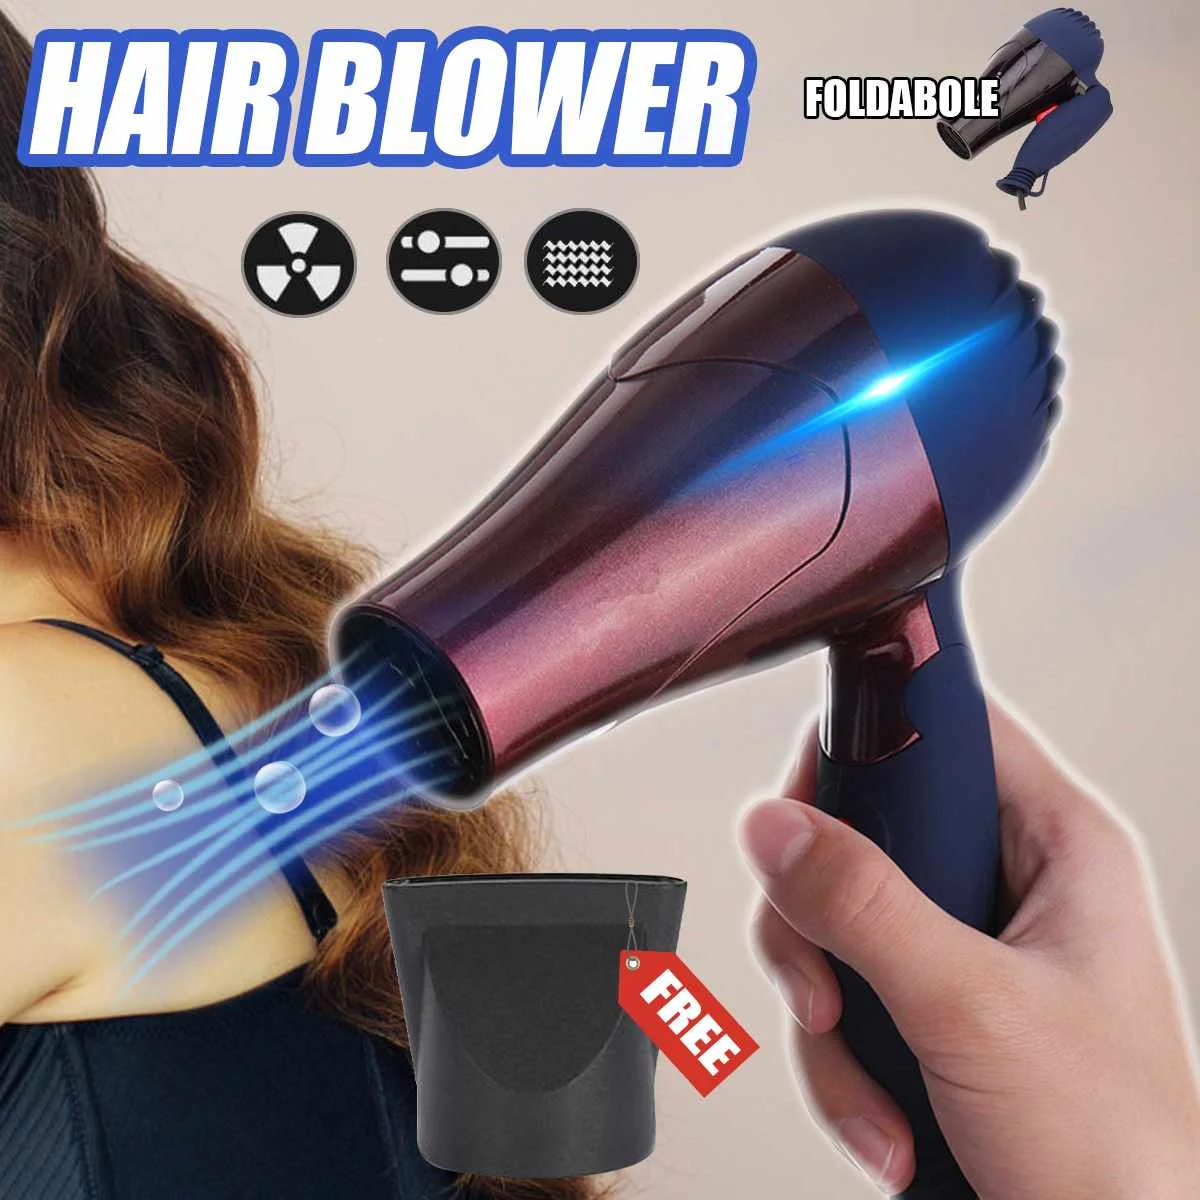 

Professional Travel Hairdryer 1500W Foldable Hairdressing Salon Electric Hair Dryer Mini Blower Household Hairstyling Tools